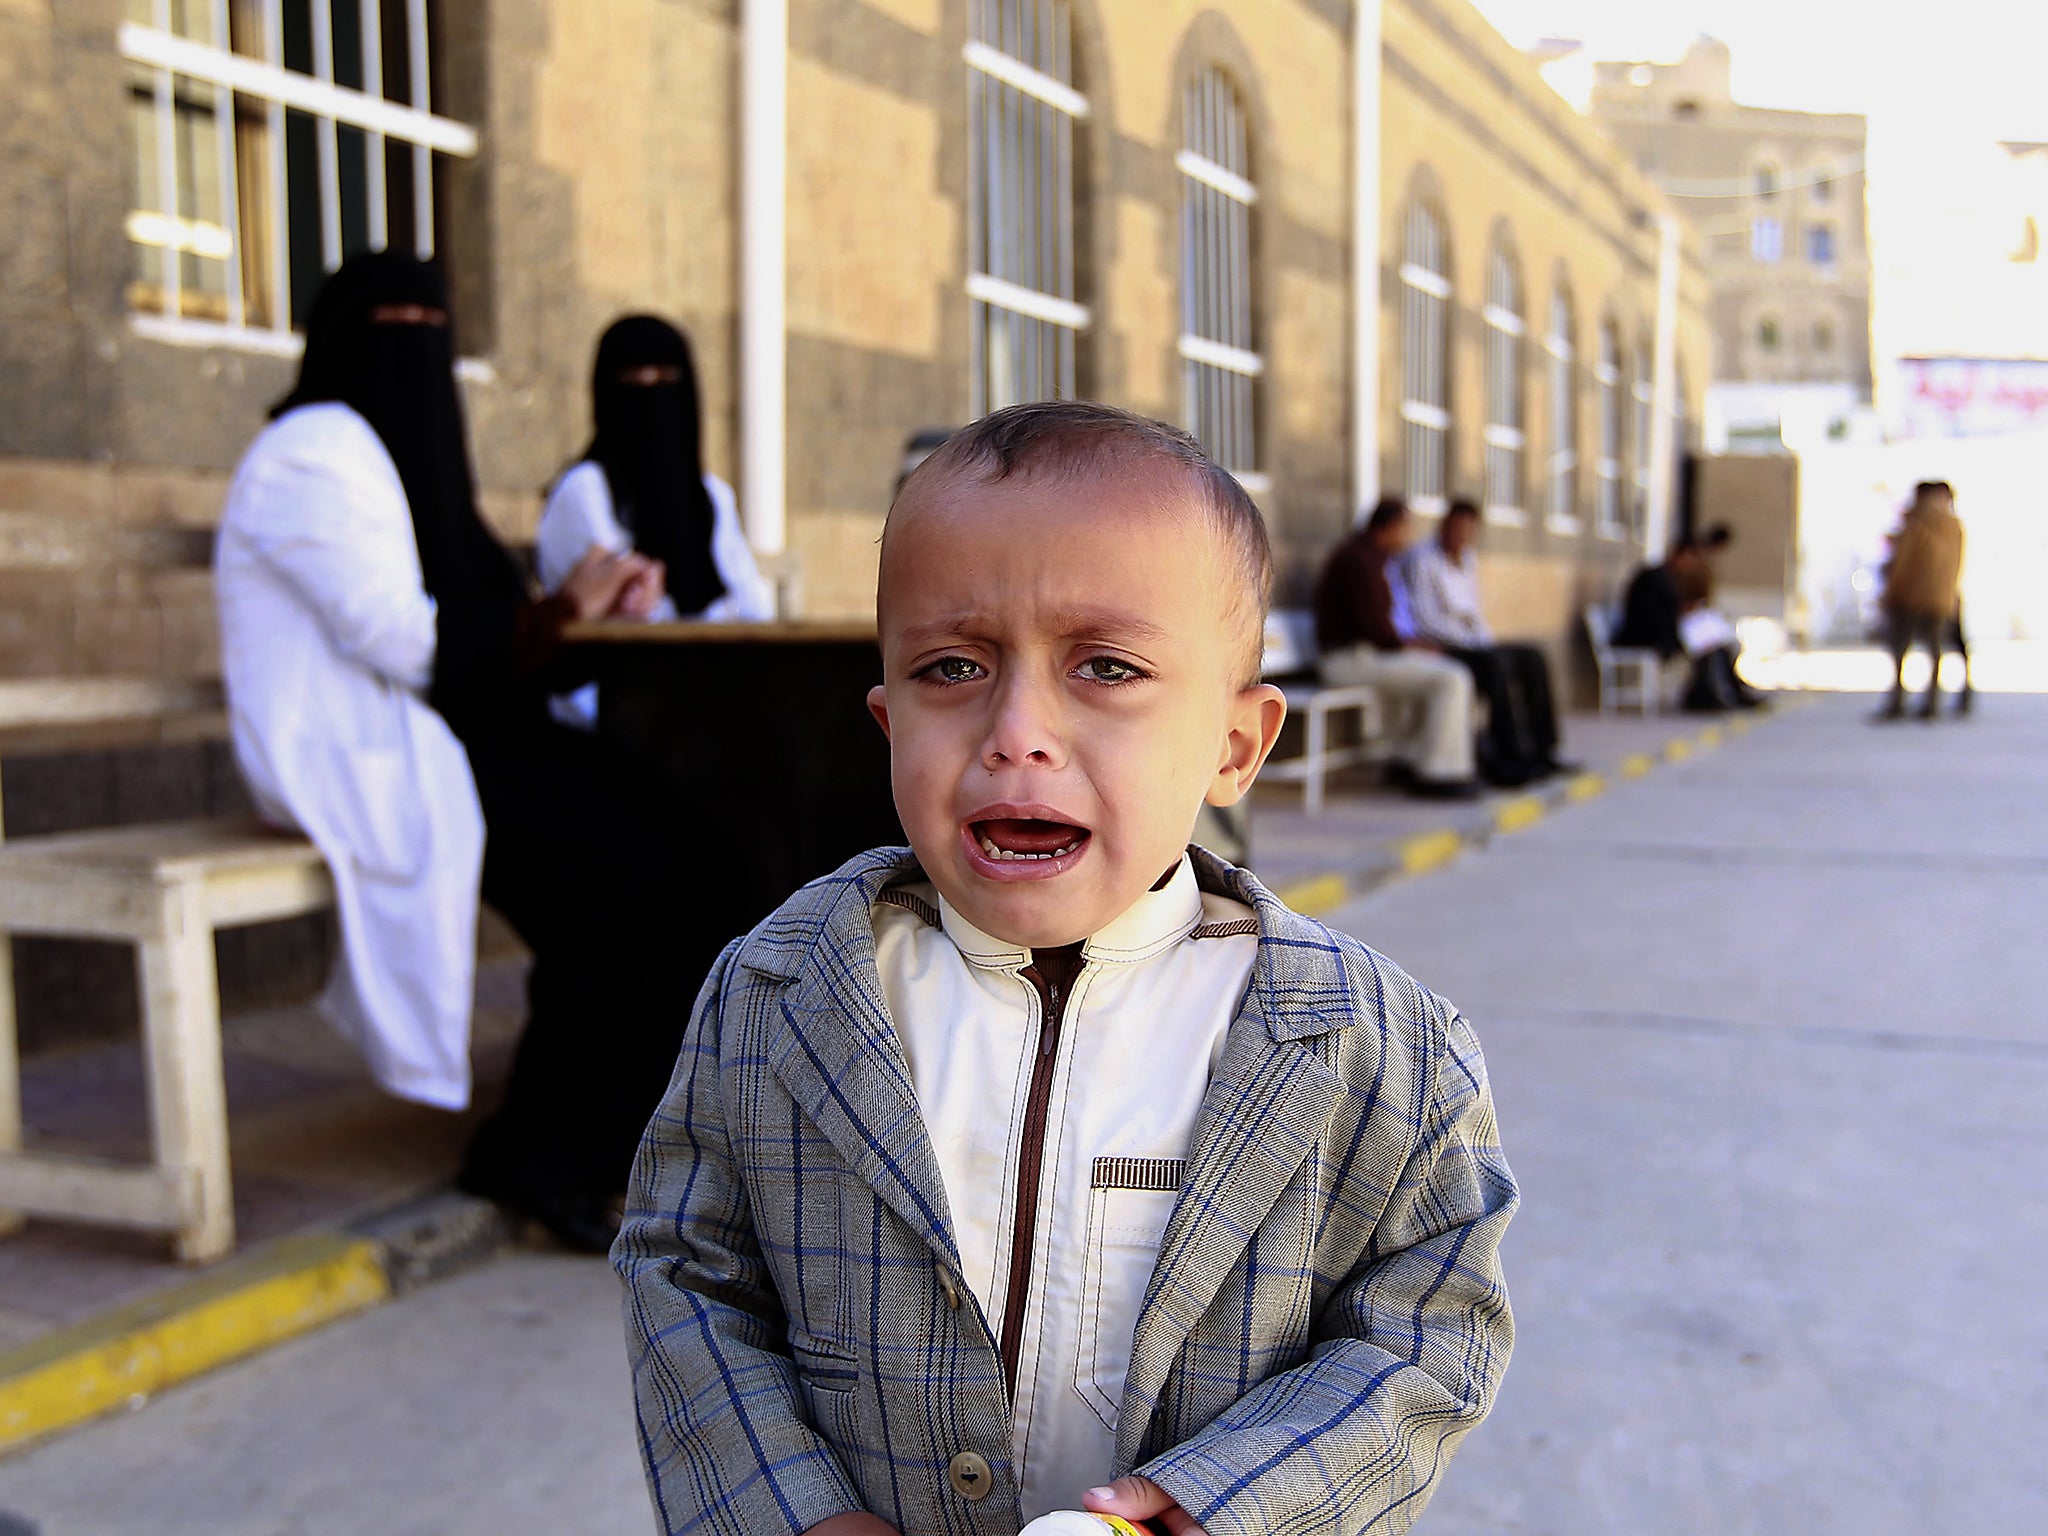 A Yemeni child cries after receiving polio vaccination during an immunisation campaign at a health center in the Yemeni capital Sanaa